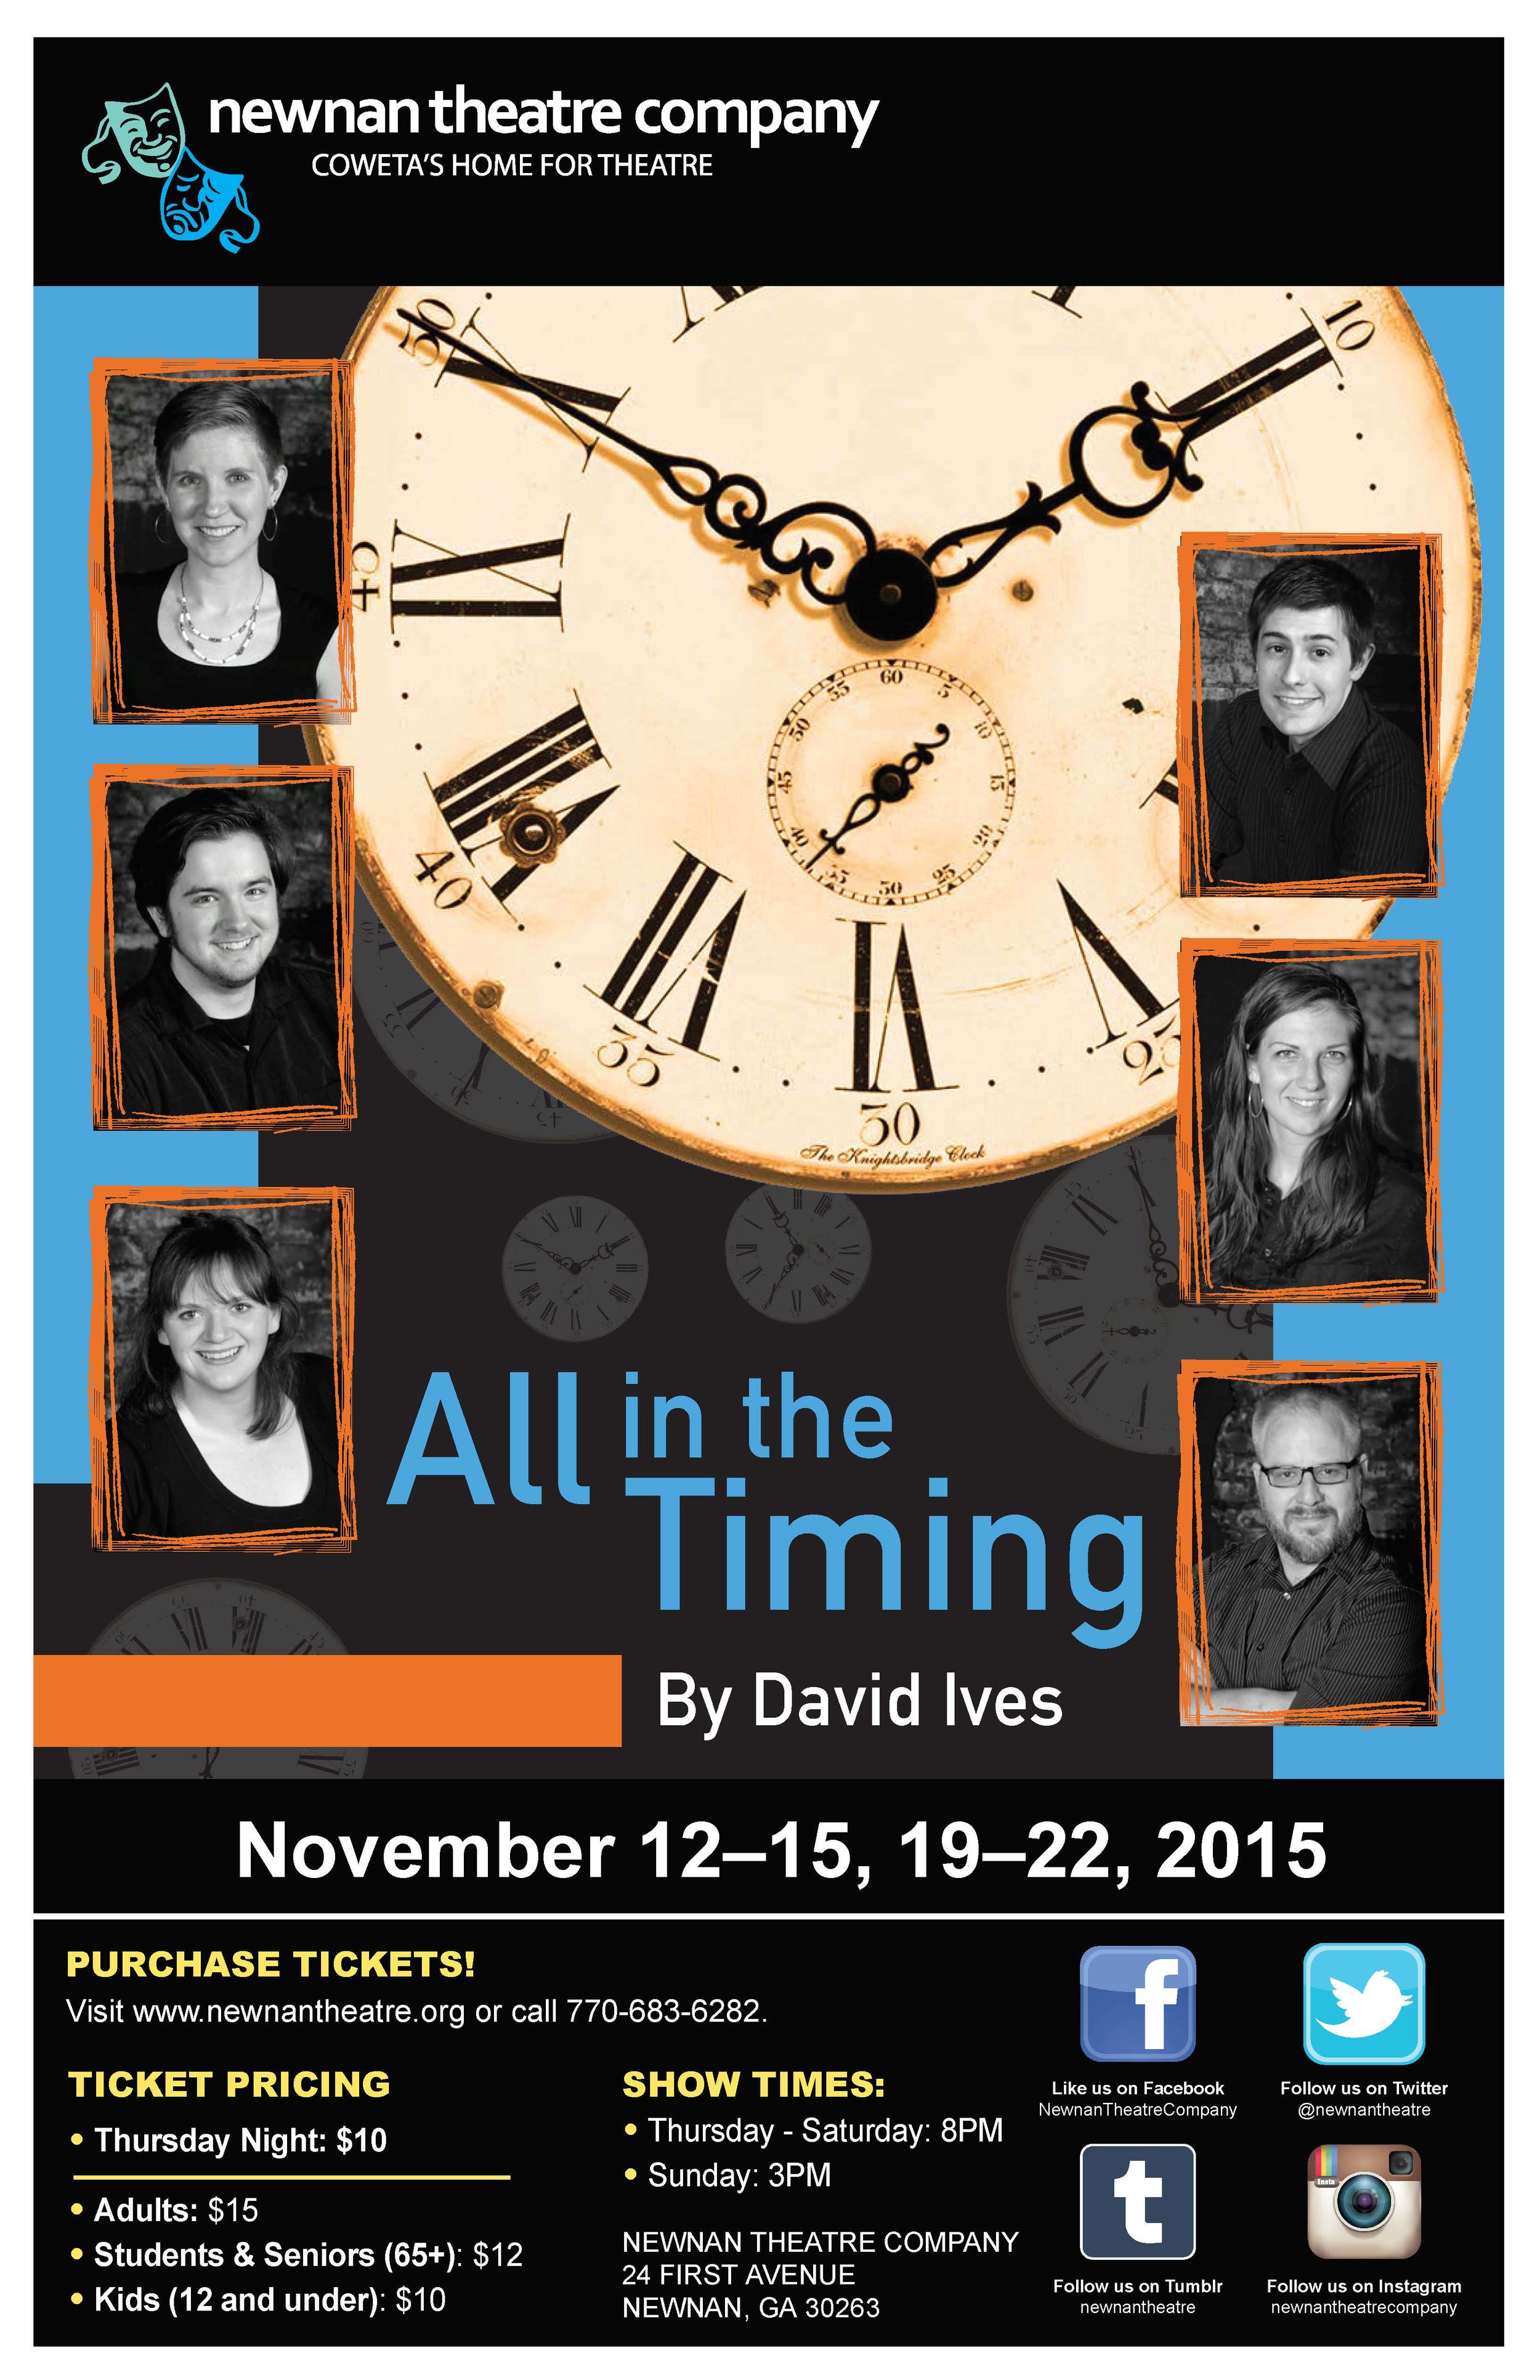 All in the Timing_11x17 poster.jpg